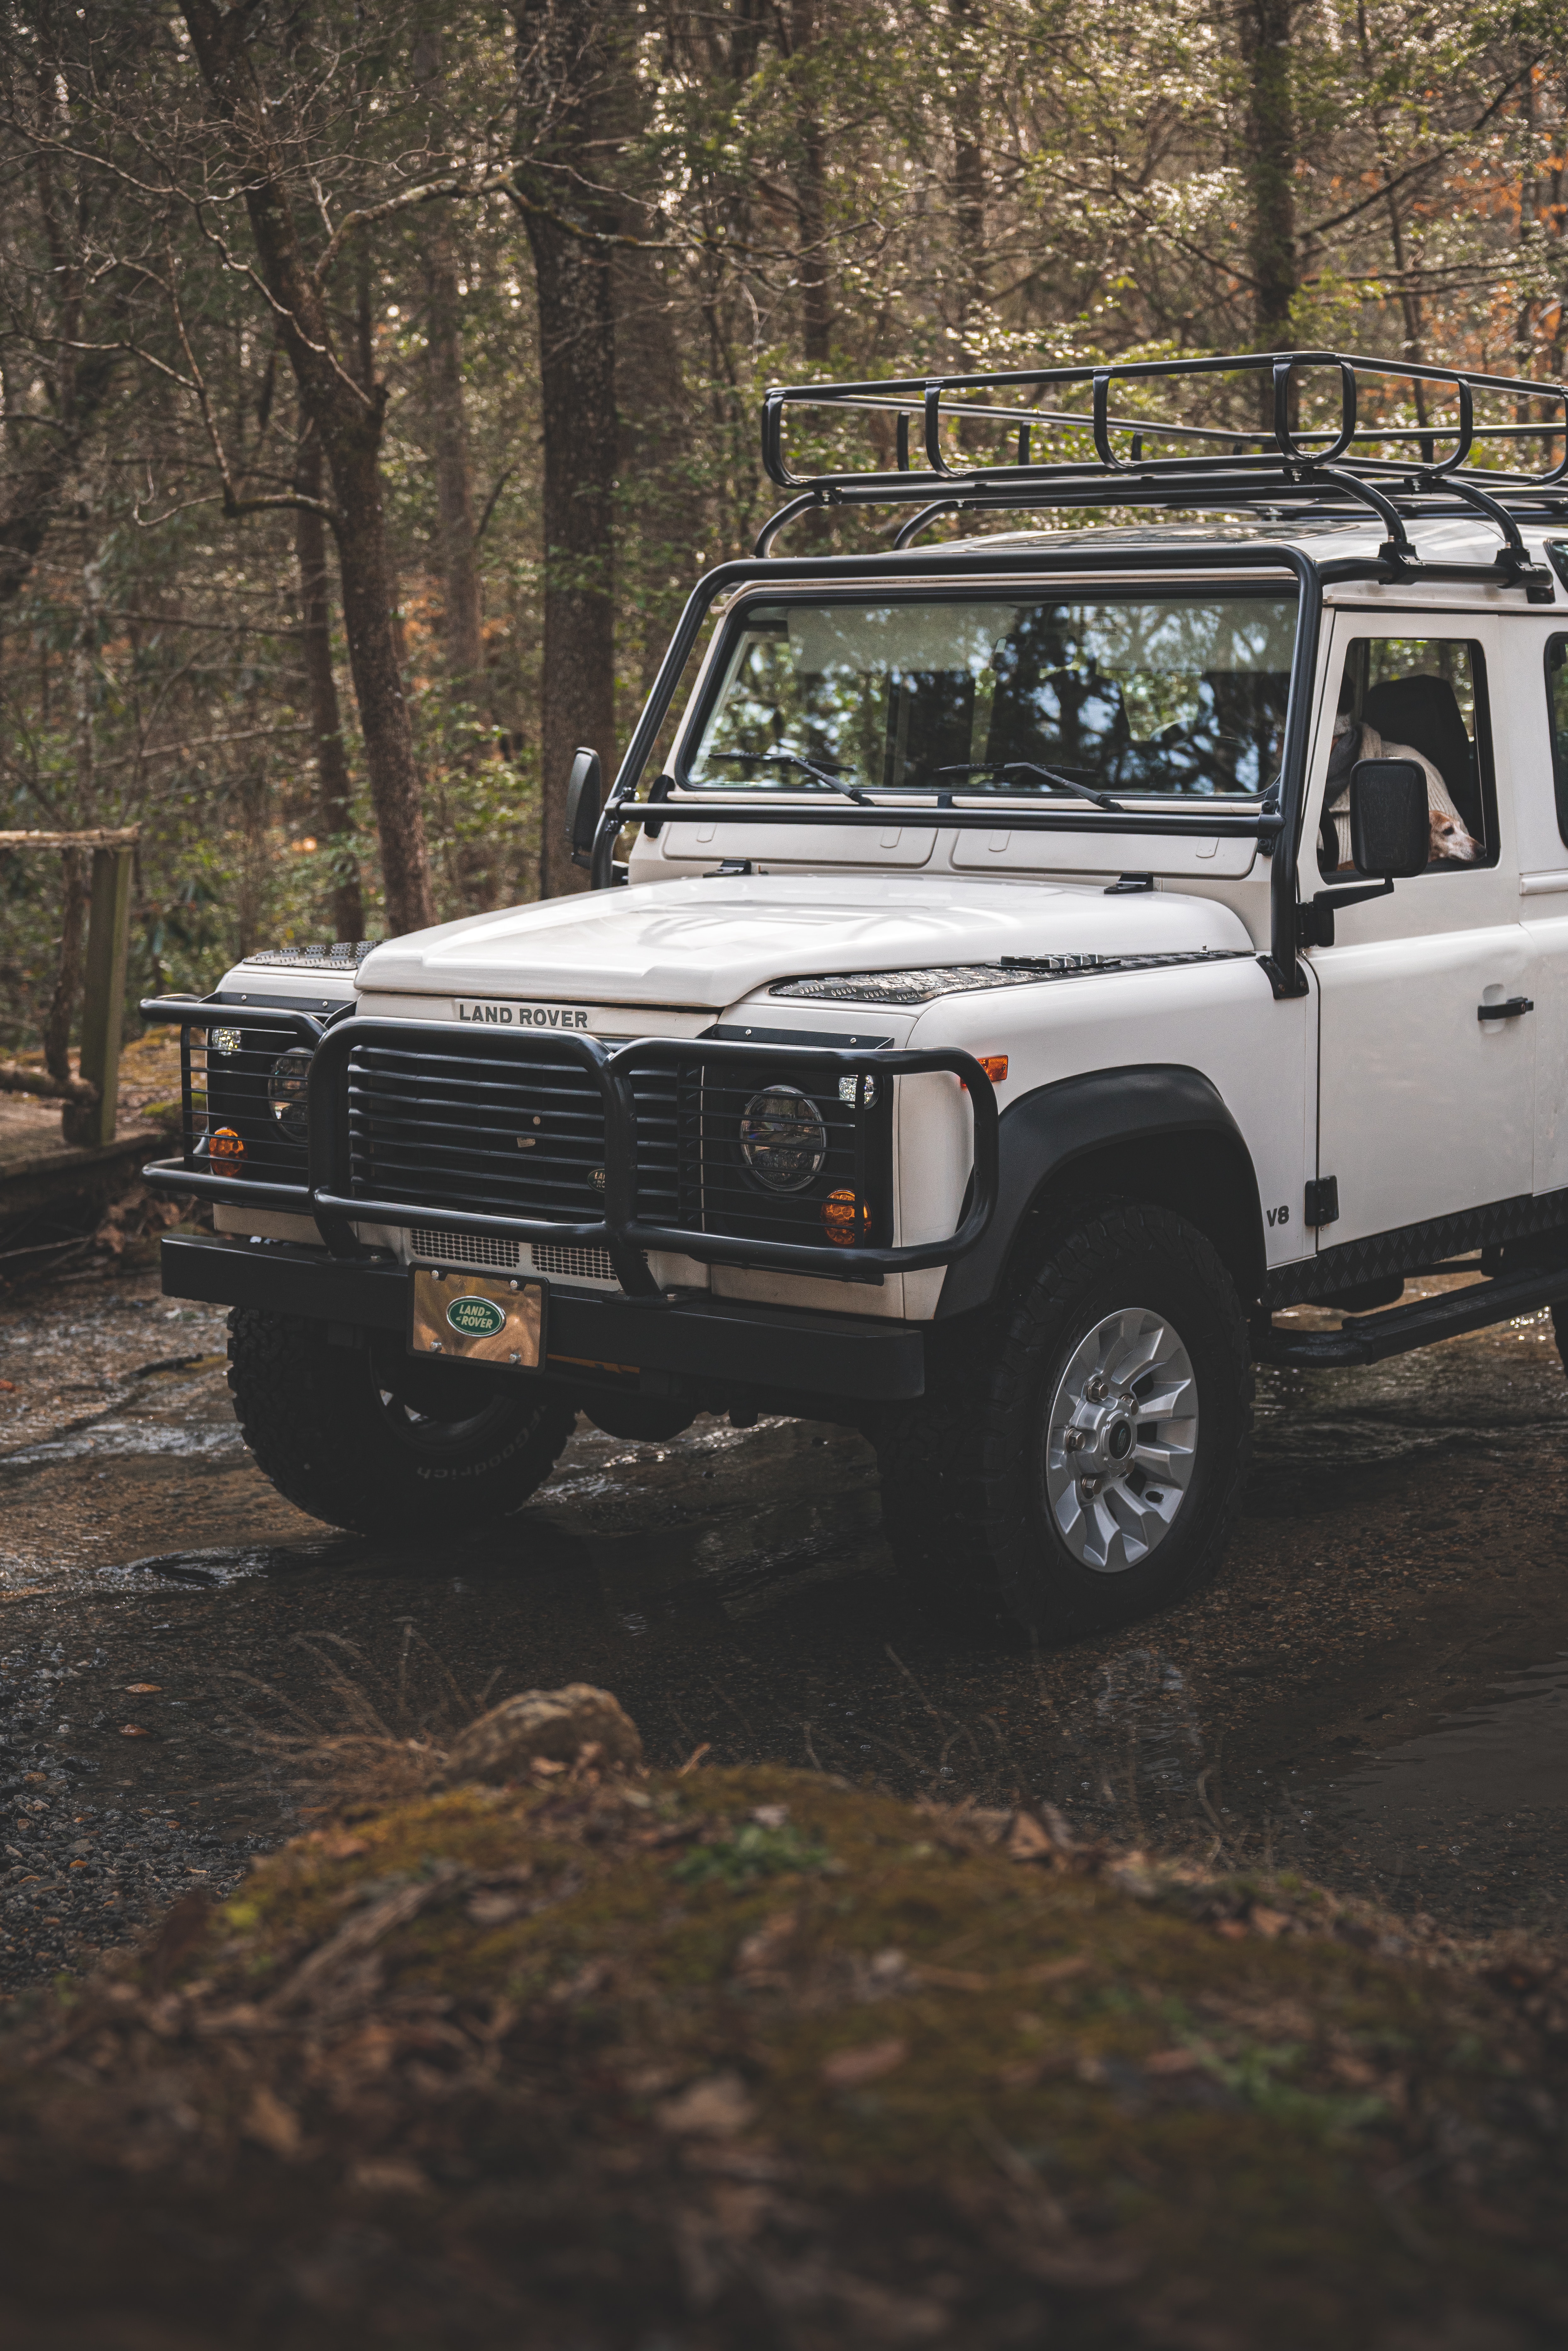 land rover, land rover defender, machine, cars, white, car, suv, jeep